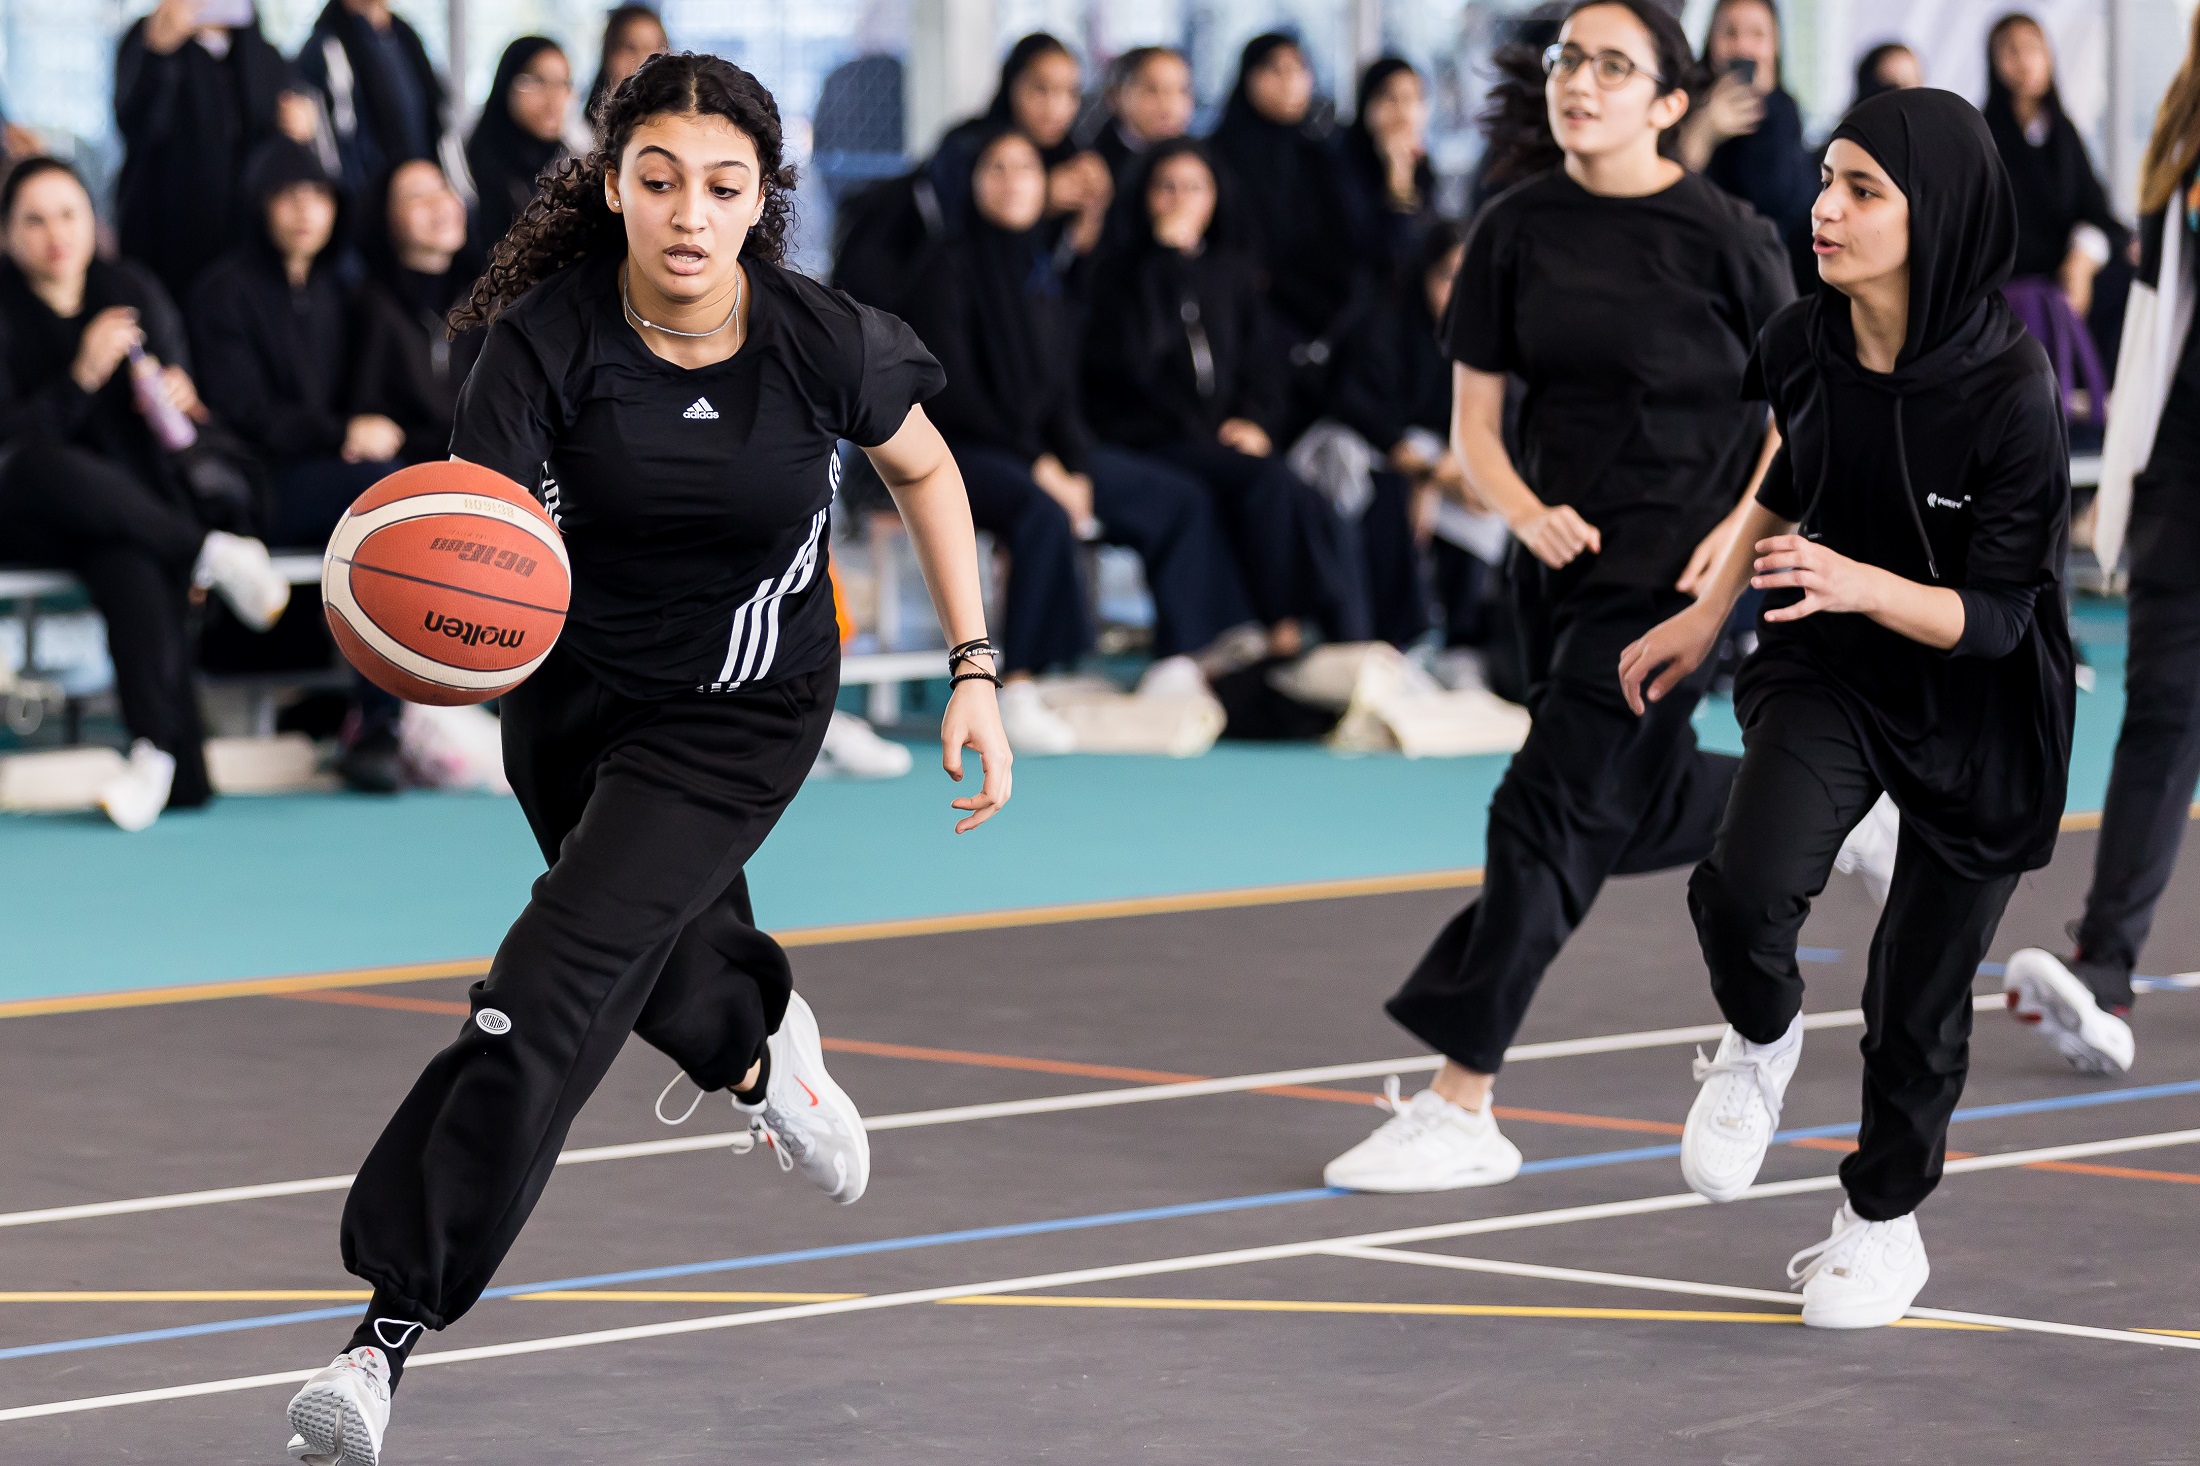 The Women’s Union organizes an open day to promote community sports